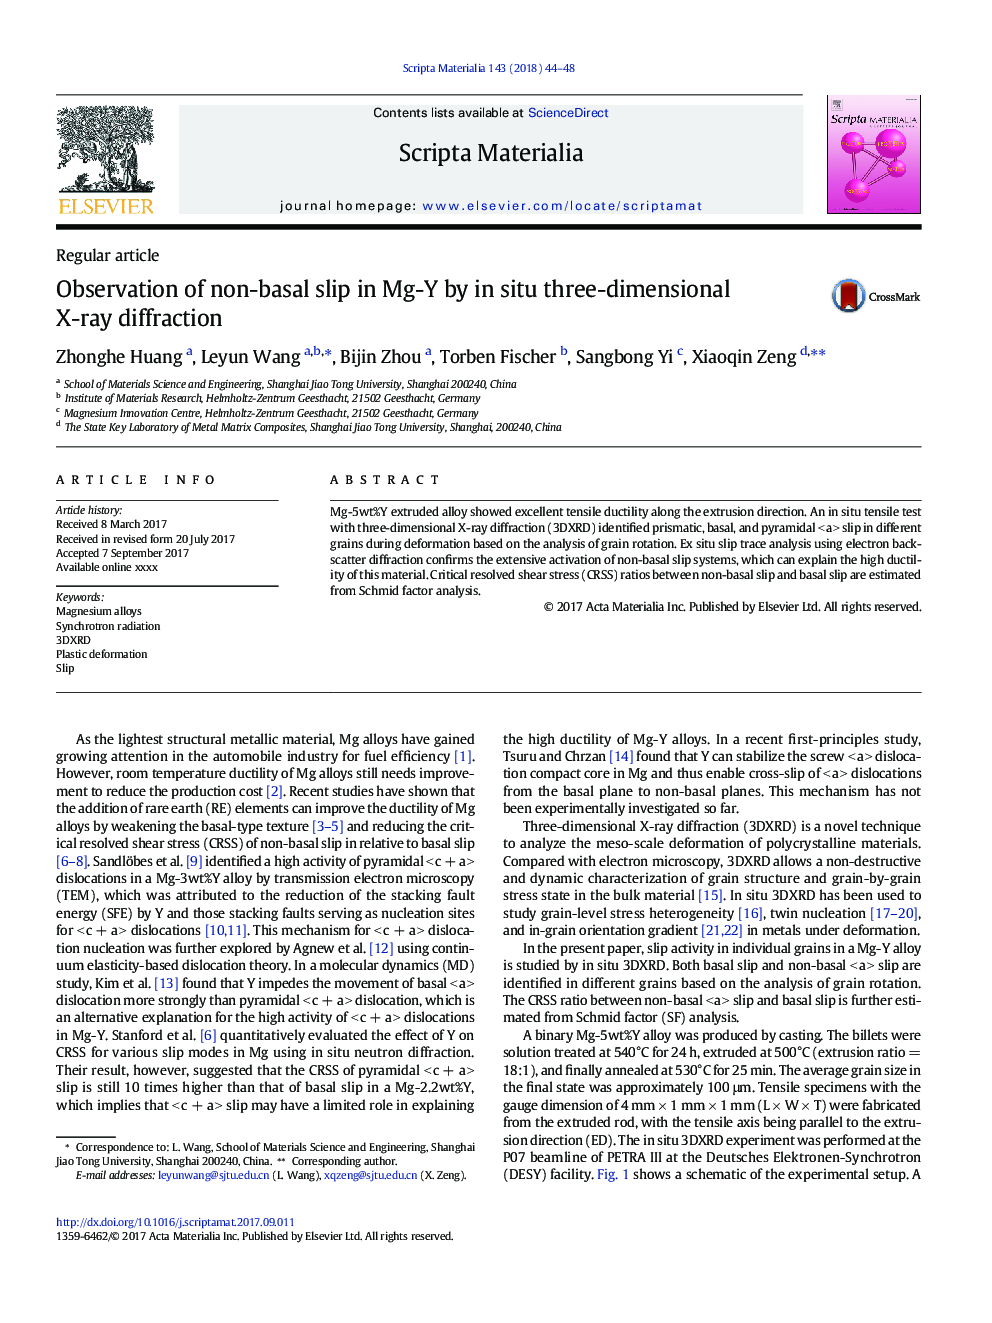 Observation of non-basal slip in Mg-Y by in situ three-dimensional X-ray diffraction